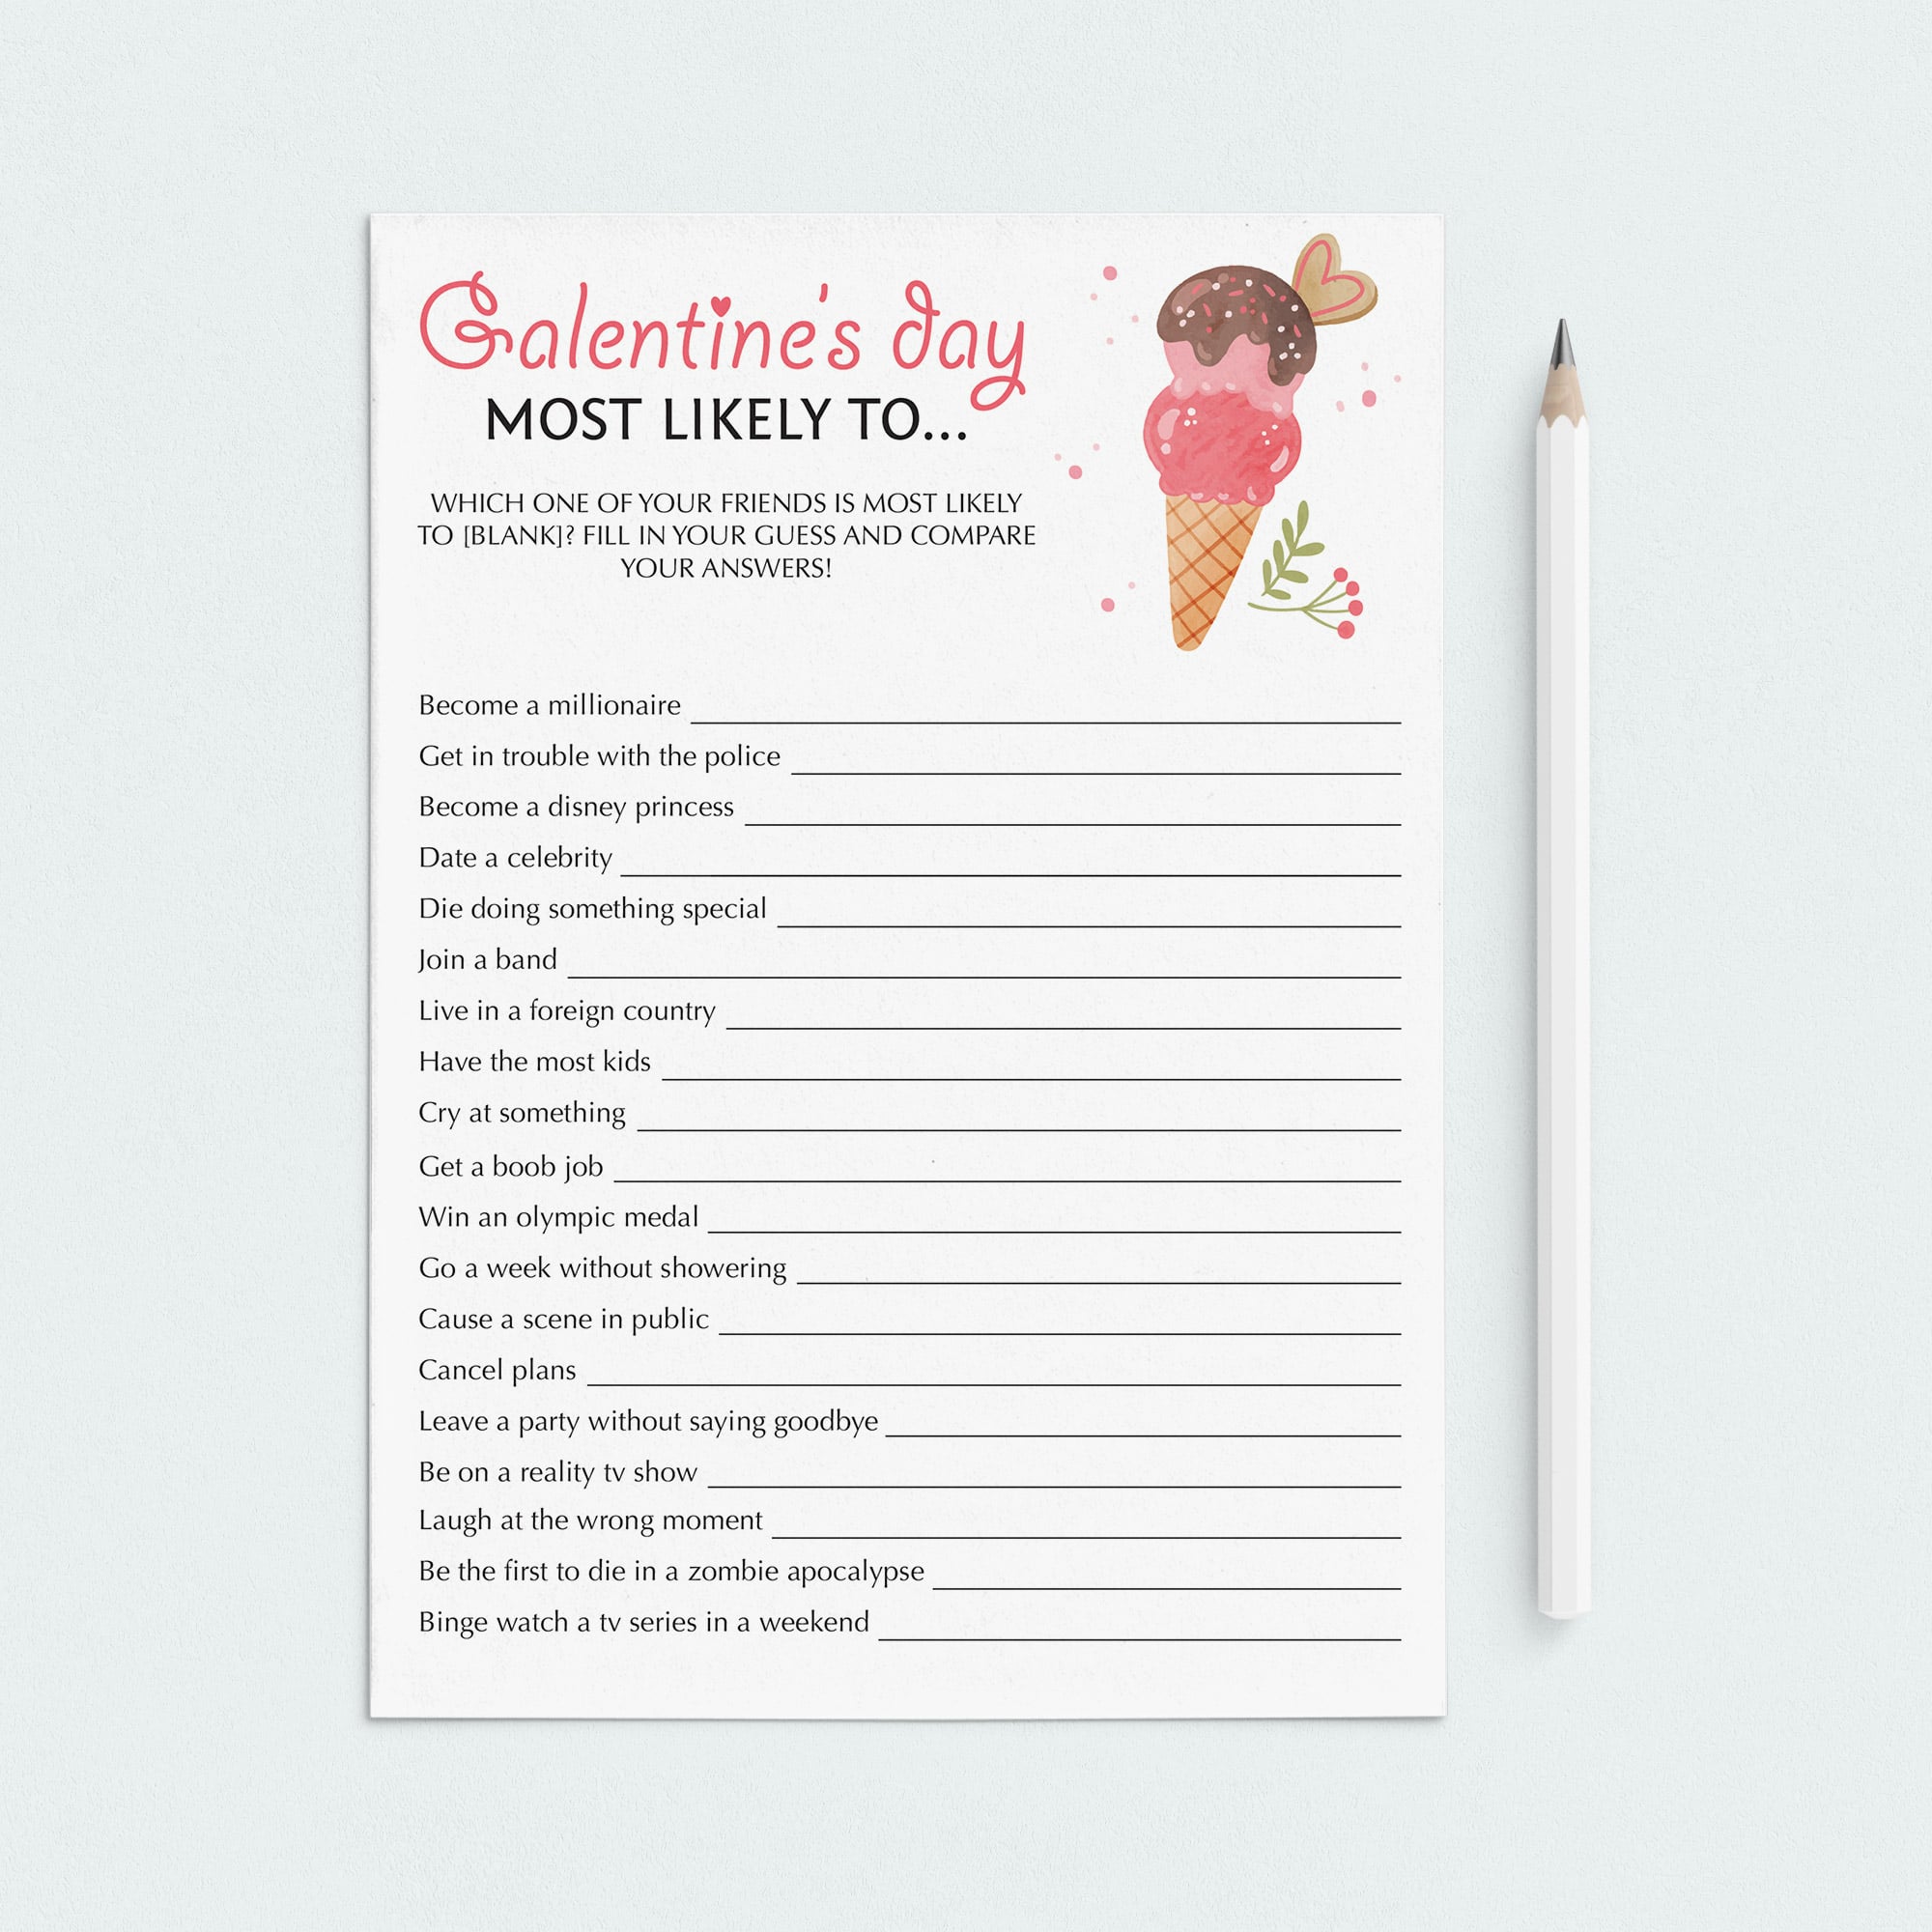 Fun Galentines Day Game for Zoom & Printable by LittleSizzle